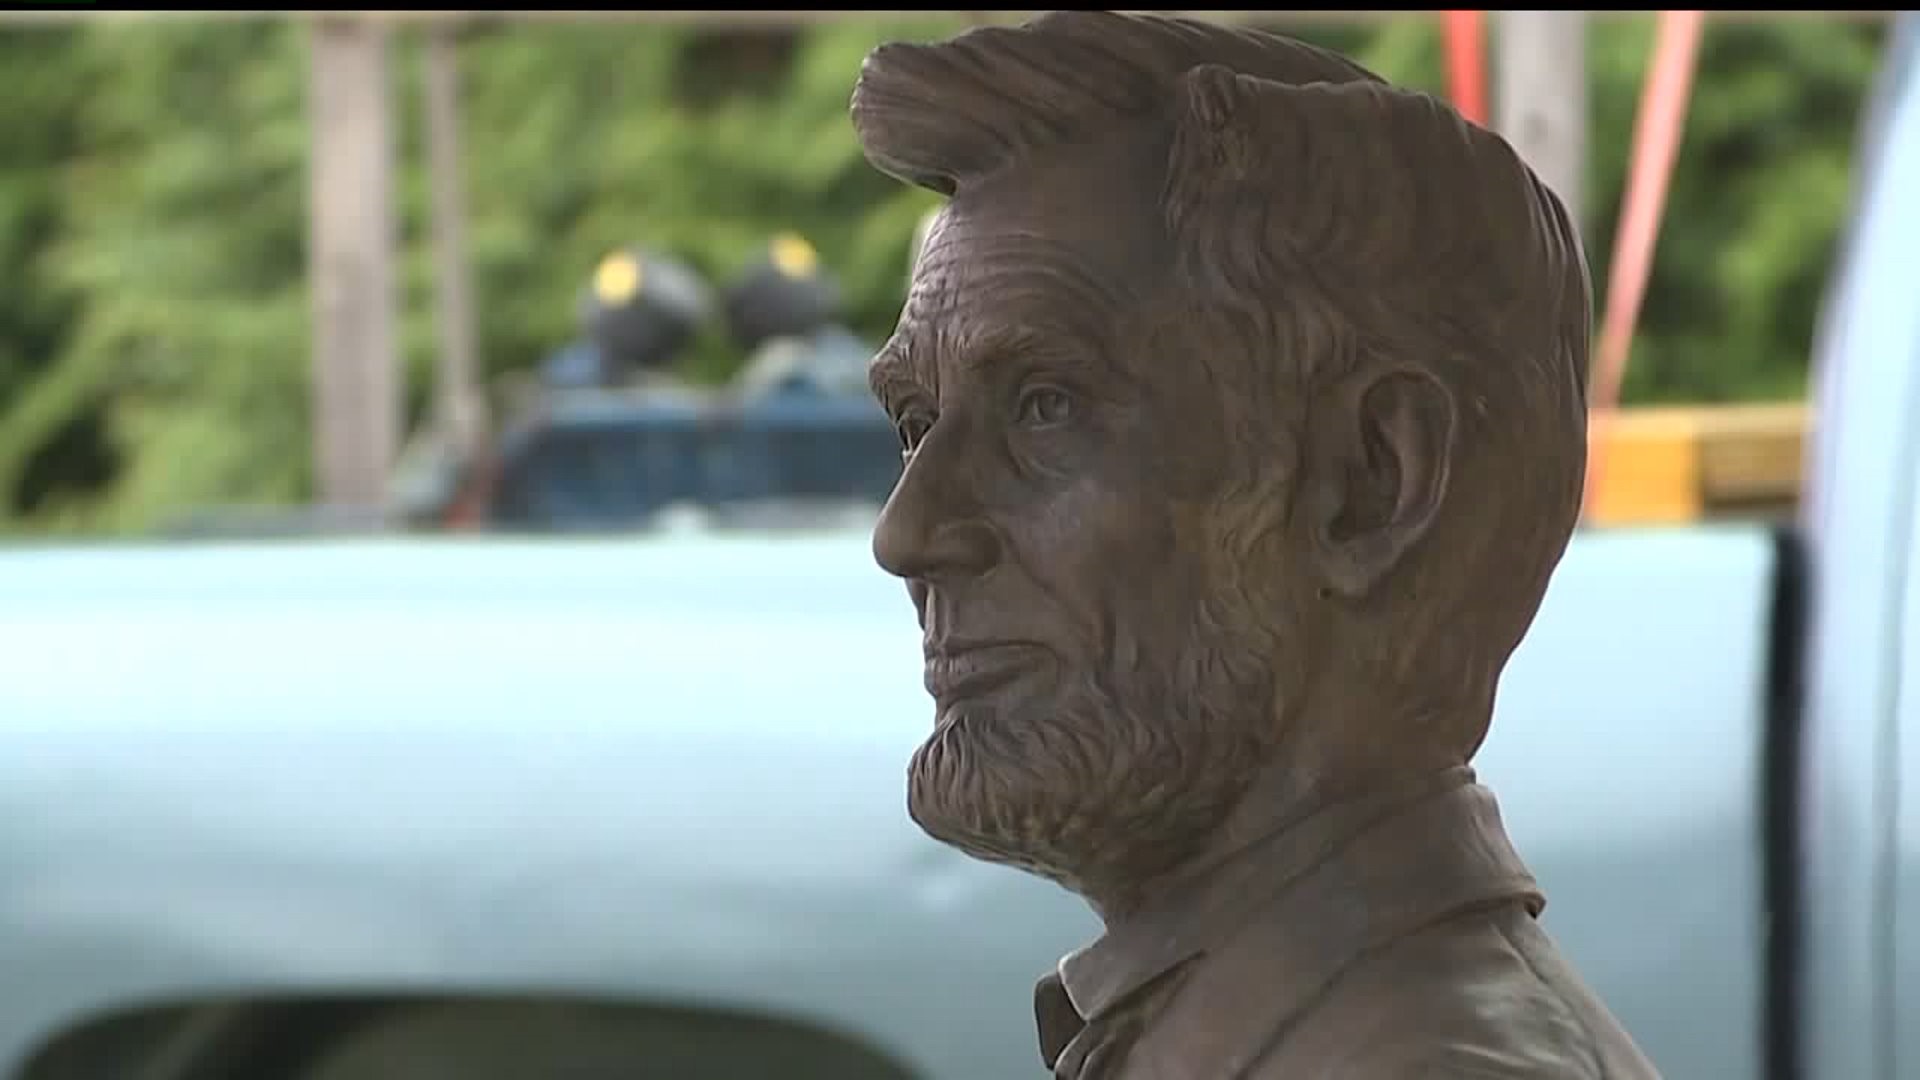 Lincoln Statue gets a Makeover